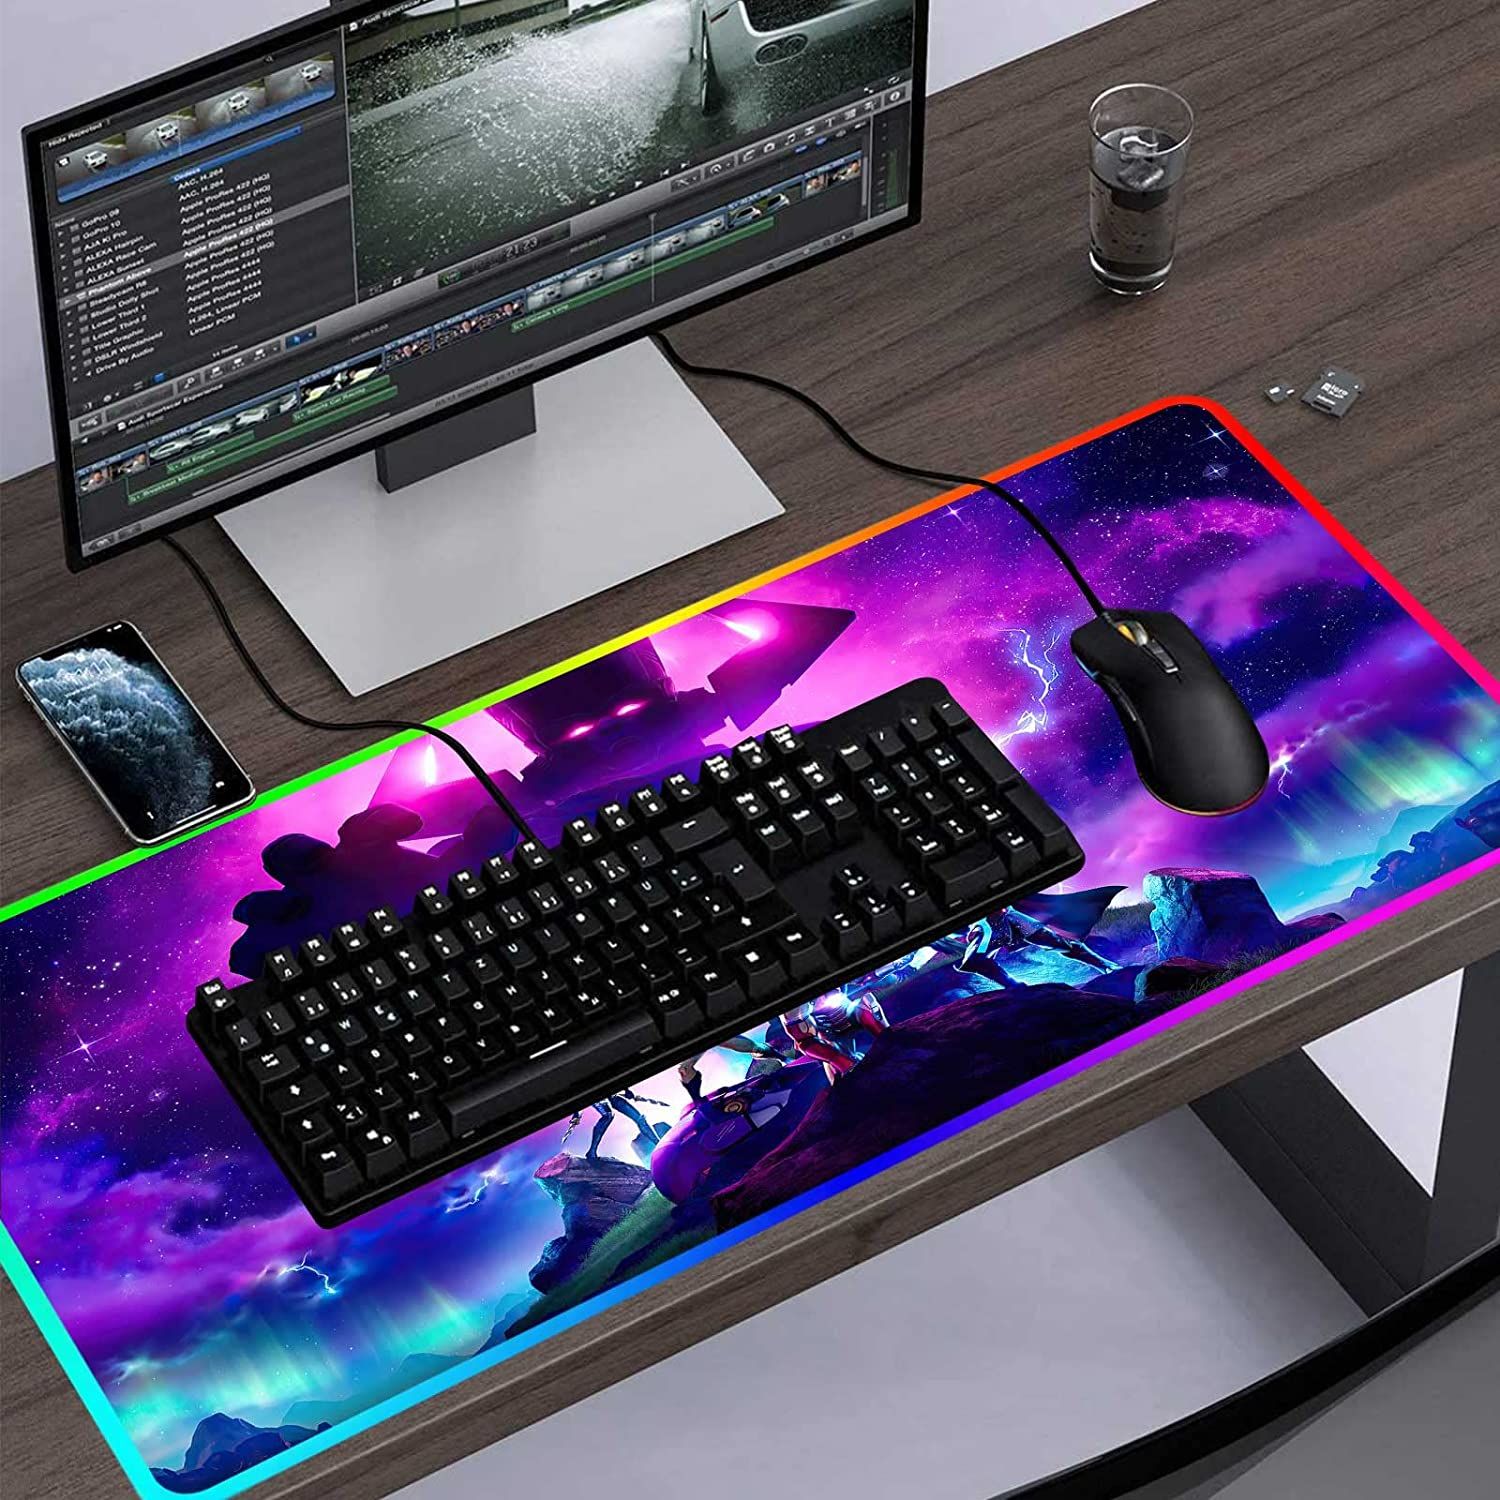 GZESZT RGB Large Gaming Mouse Pad Galactus Skin with pc